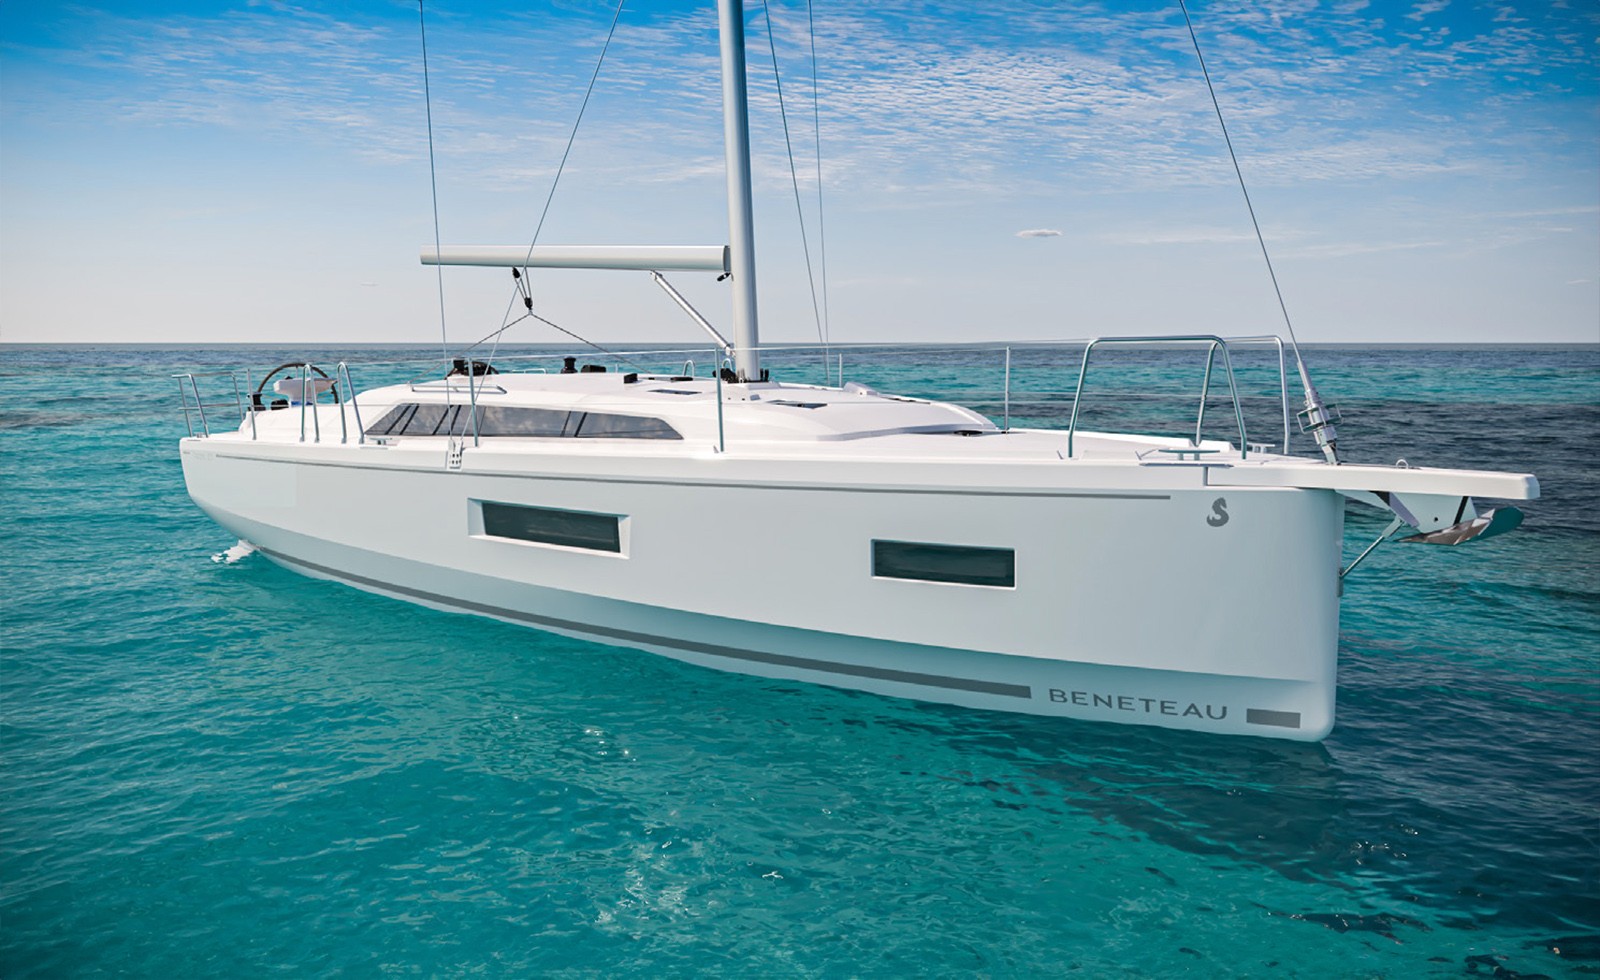 Beneteau announces the launch of the new OCEANIS 37.1